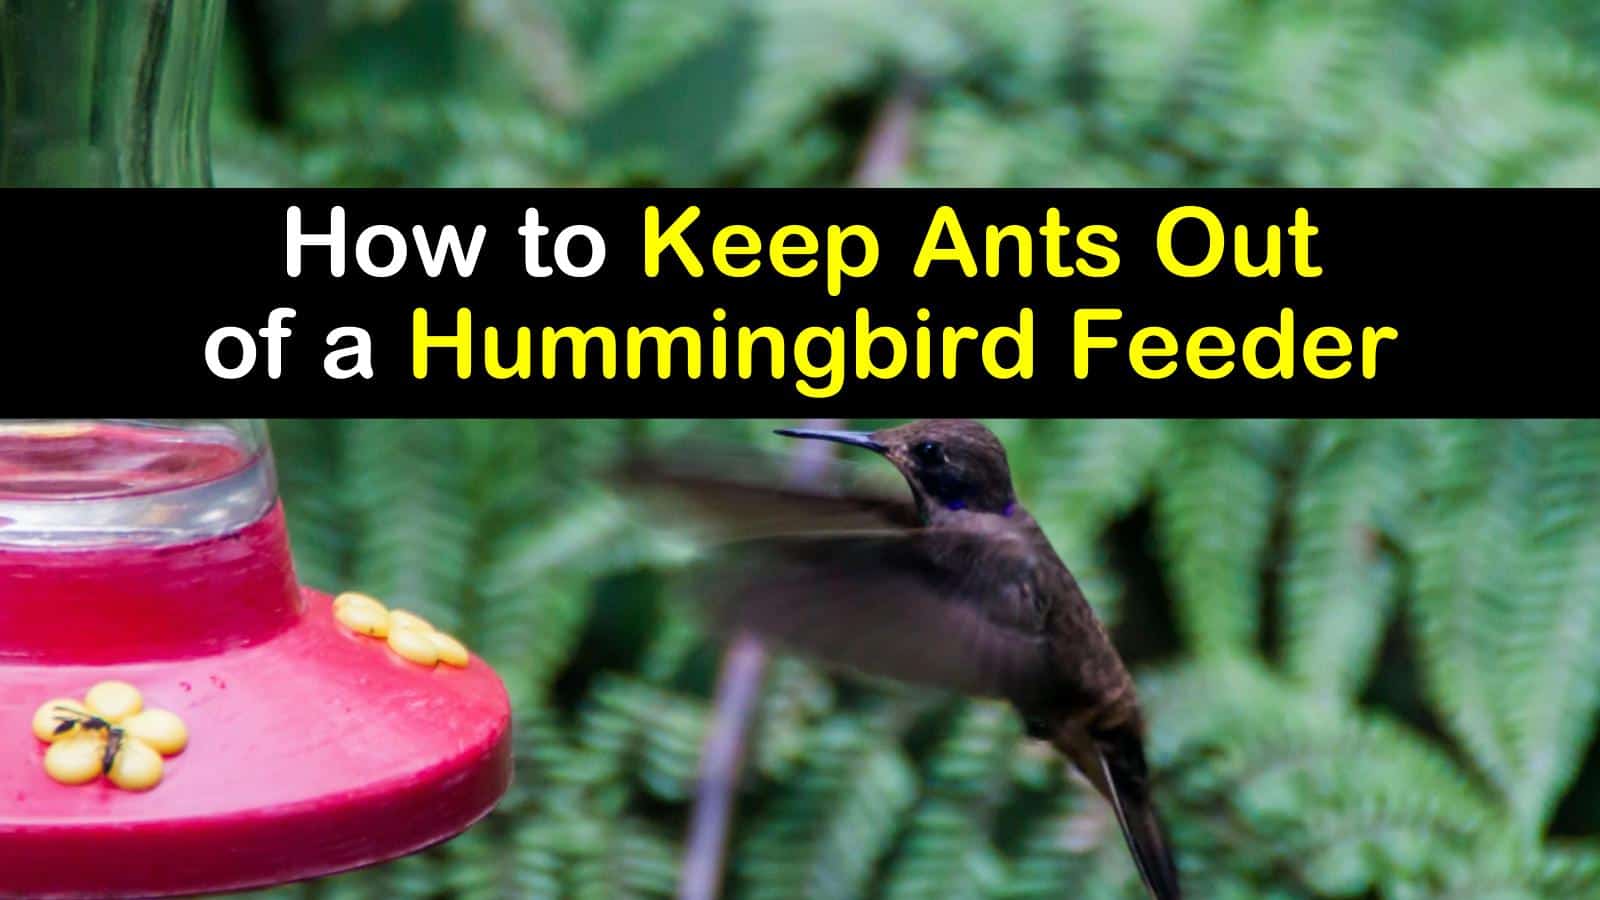 How to Keep Ants Out of a Hummingbird Feeder titleimg1